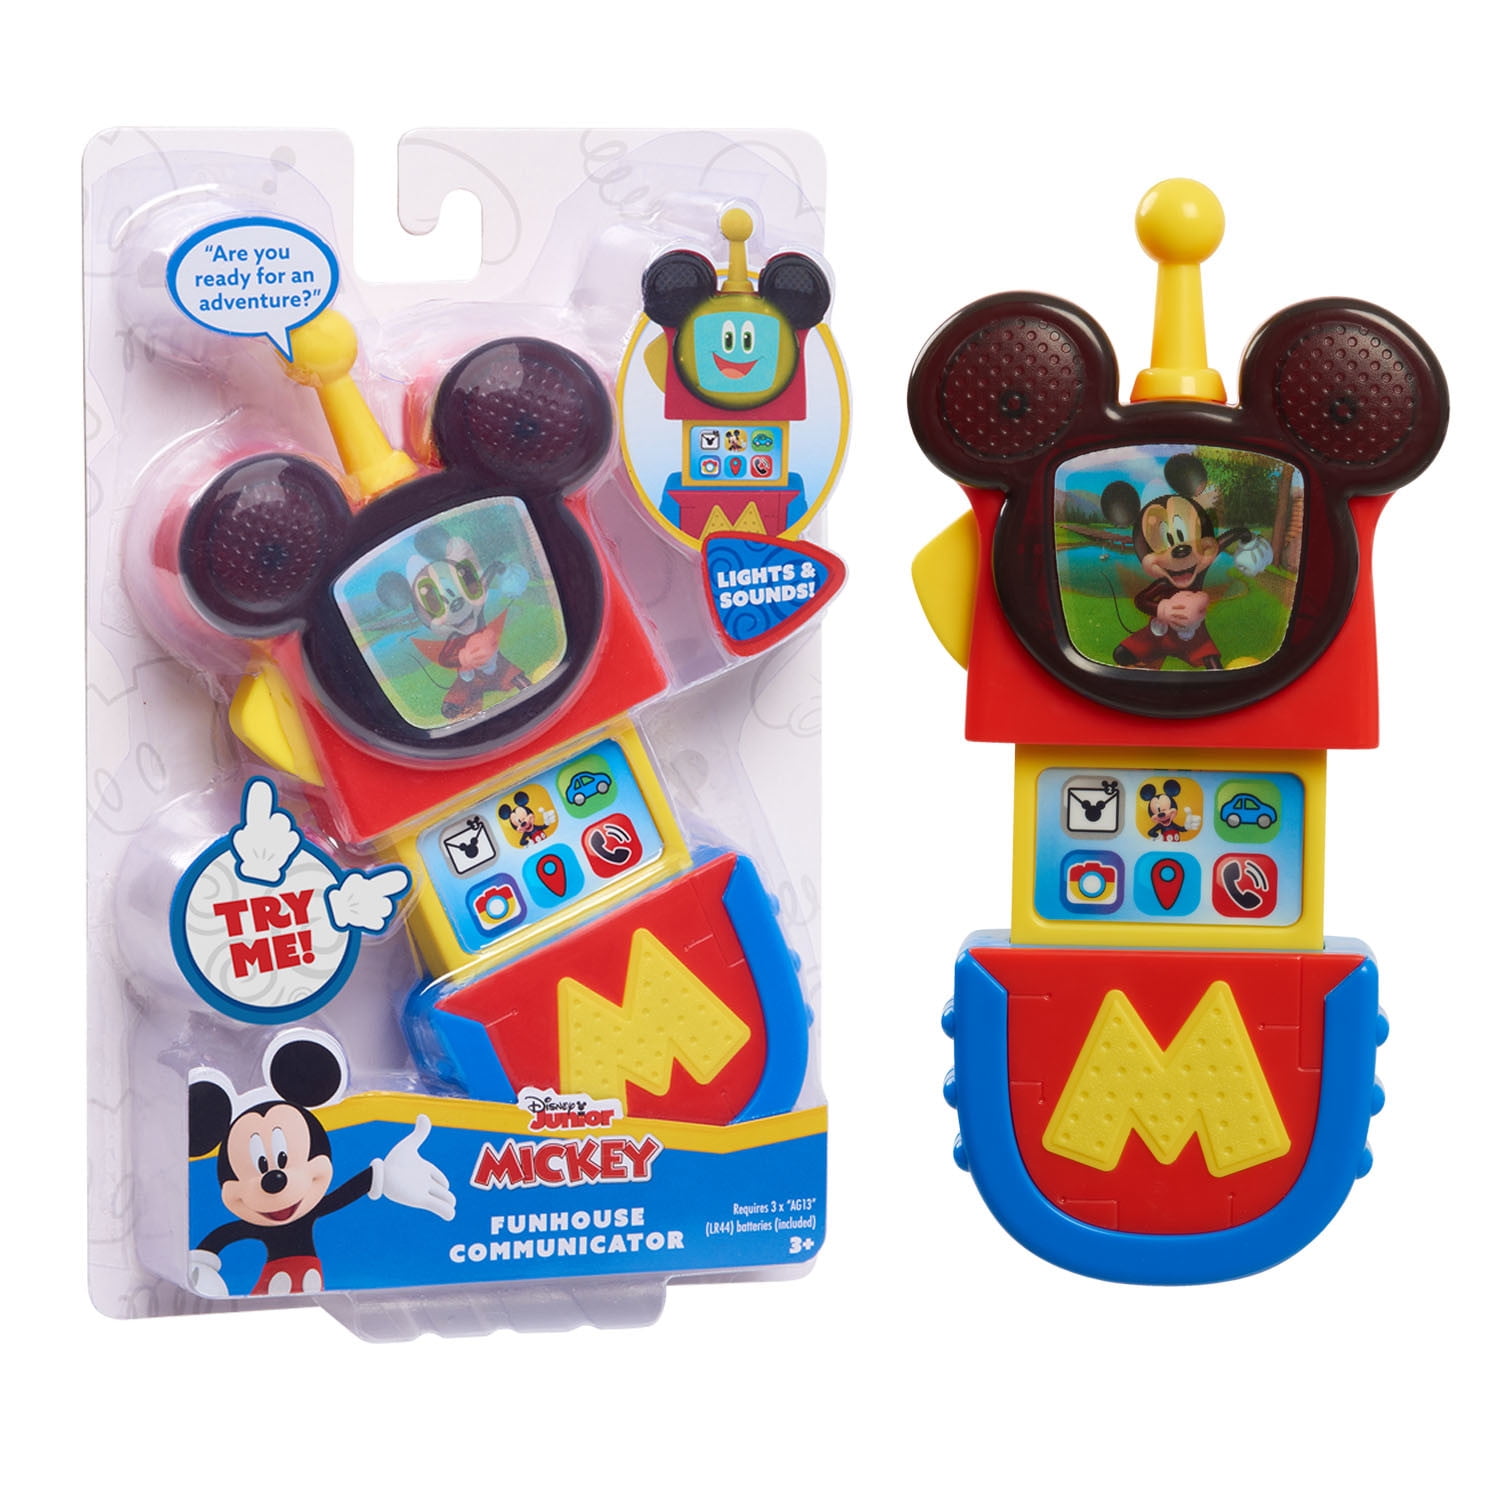 Brand New Disney Junior Mickey/Minnie Mouse Clubhouse Toy Playsets 